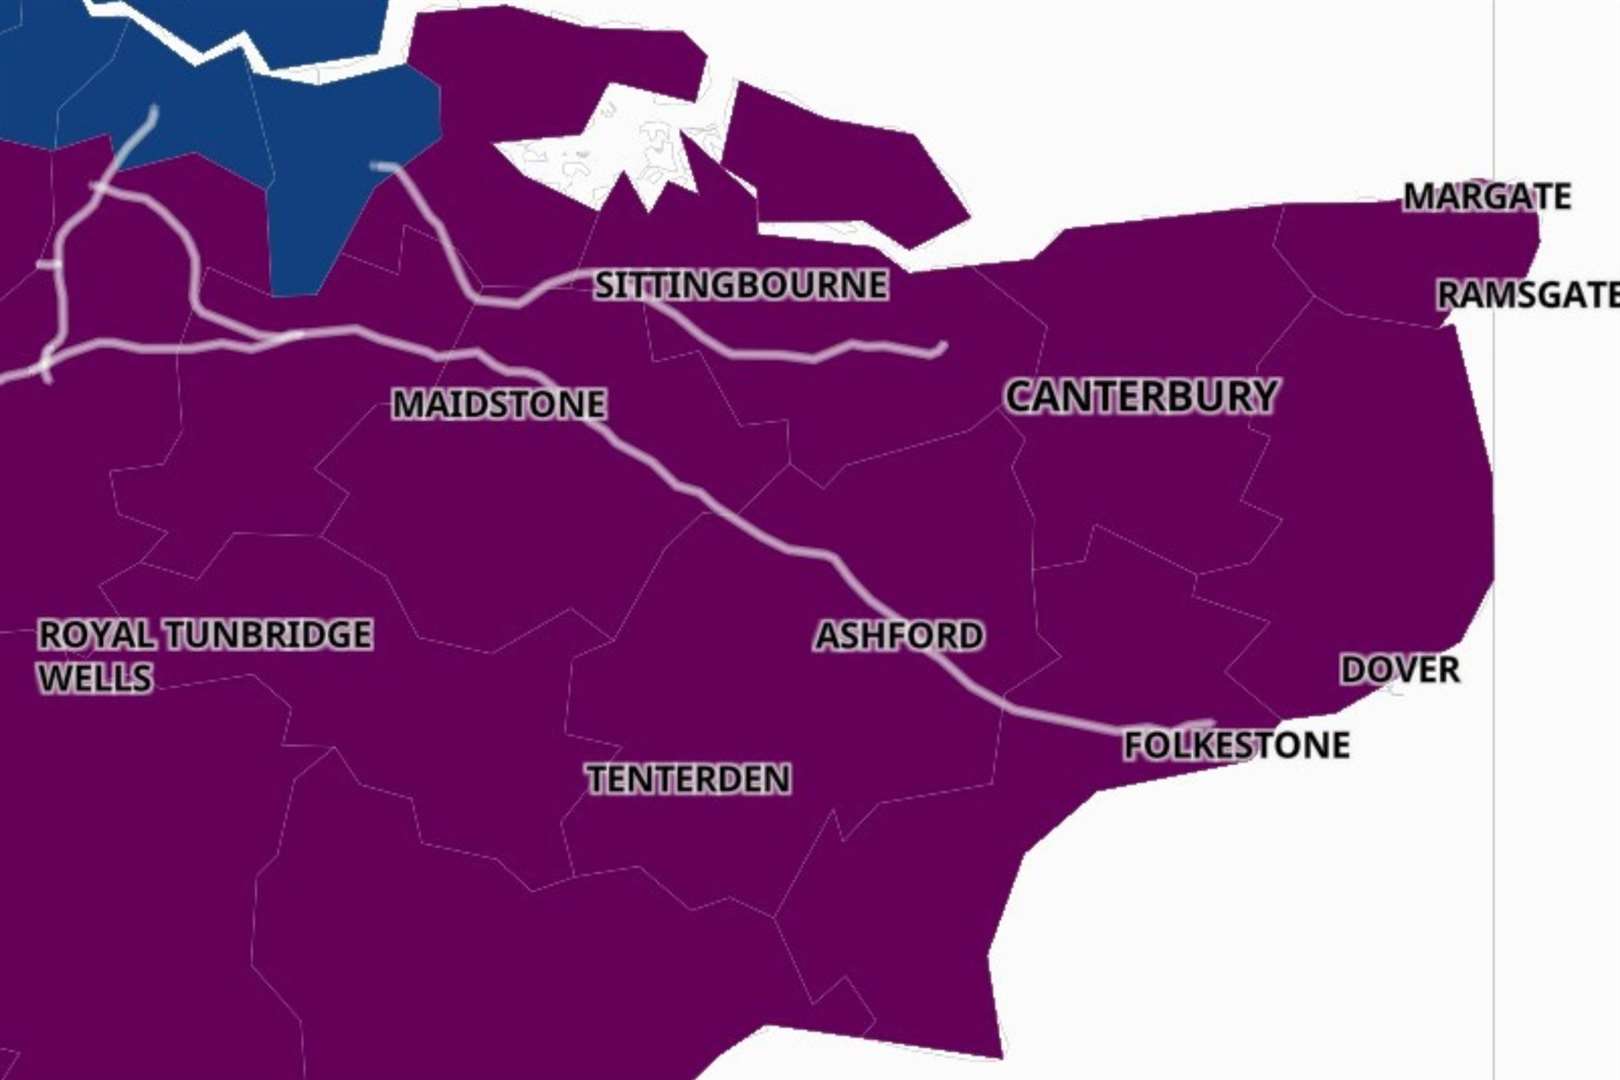 Now almost all of the county has an infection rate between 400-799 per 100,000 people (in purple on map)